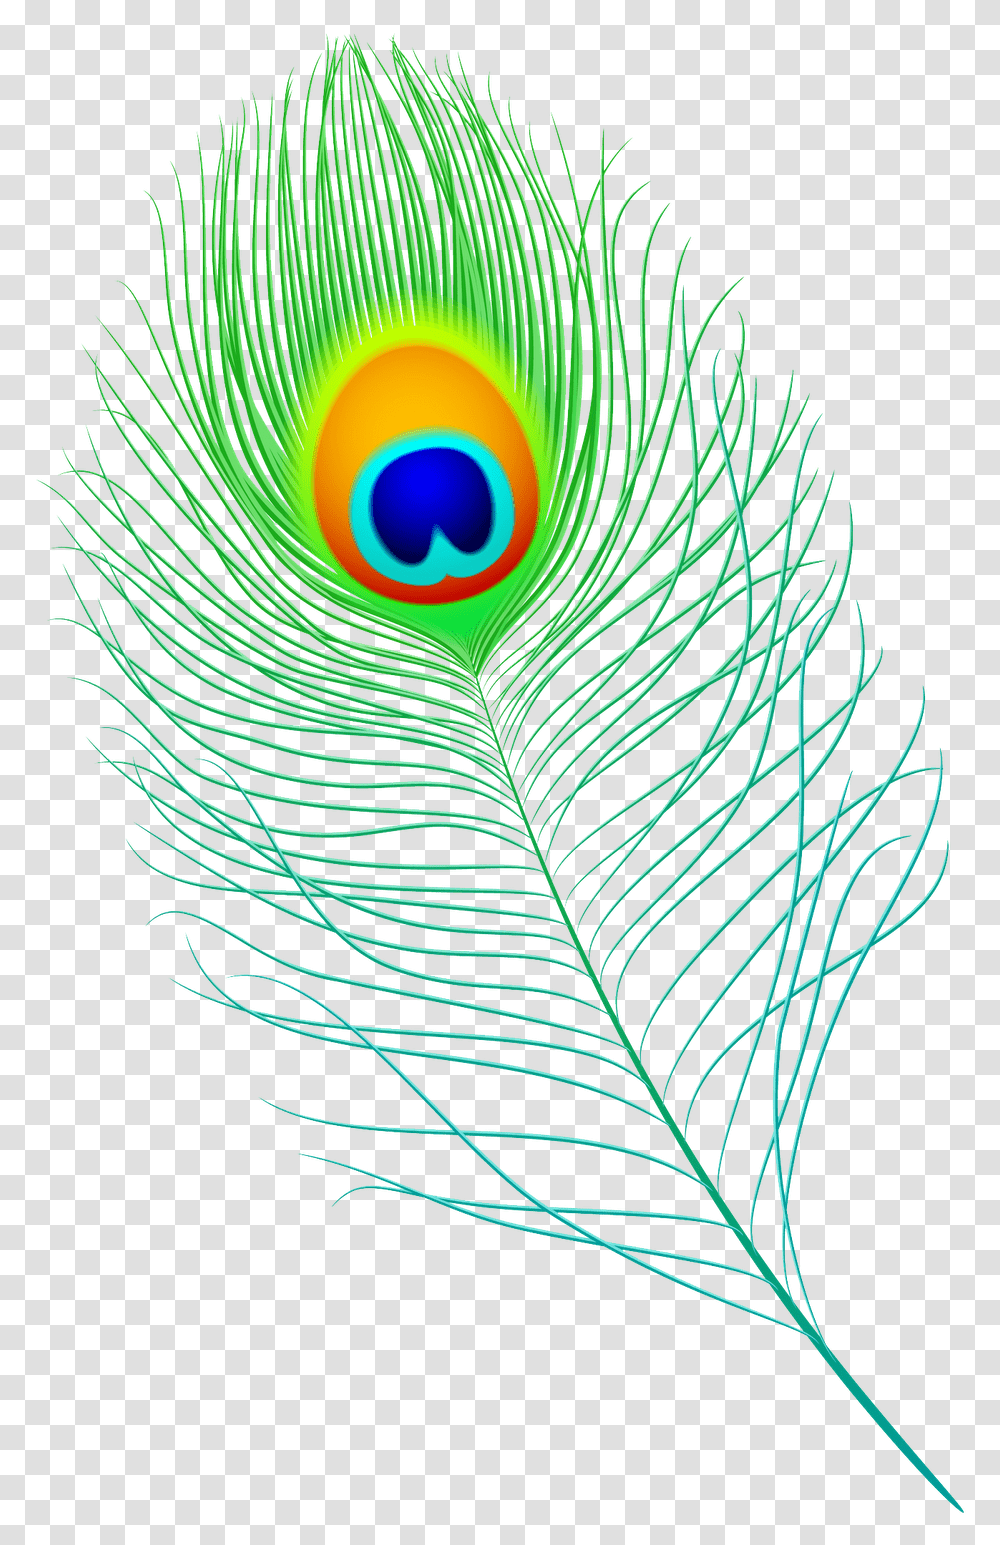 Peacock Feather Vector Peacock Feather Pen Vector, Ornament, Pattern, Fractal Transparent Png